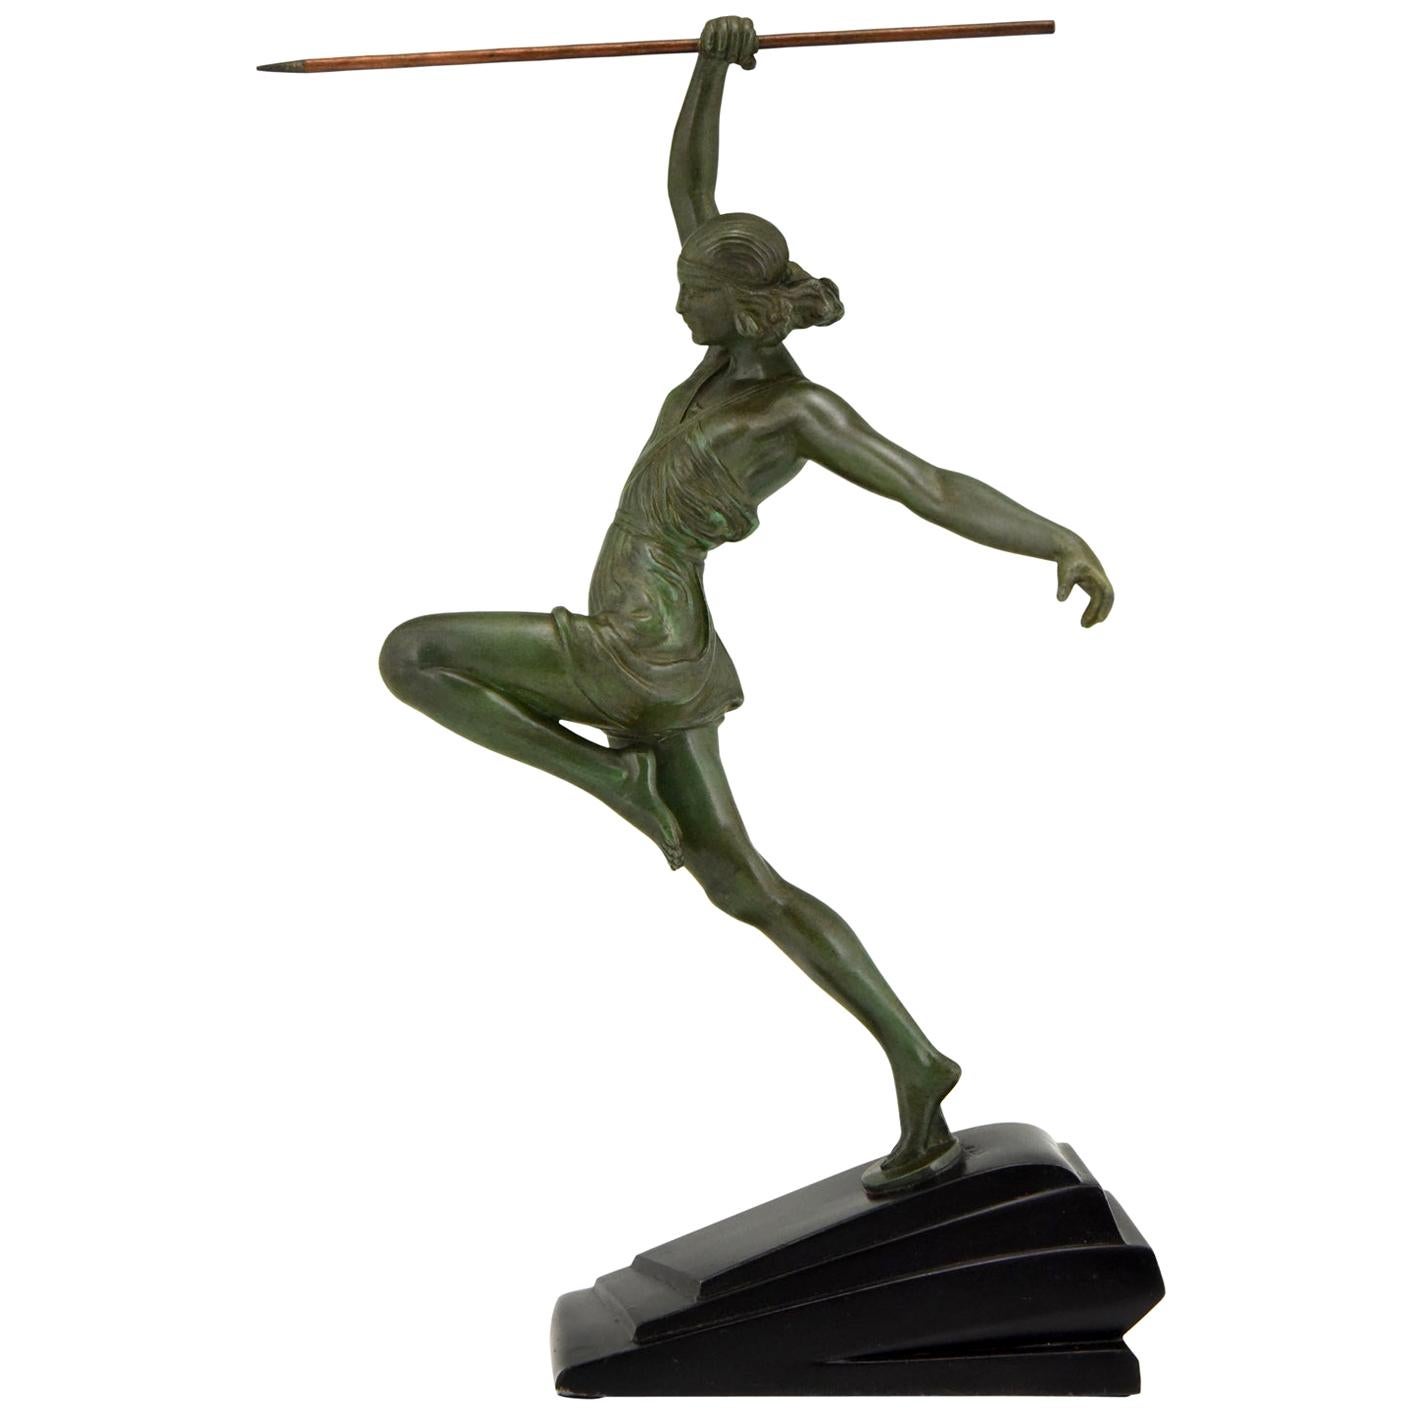 Art Deco Sculpture Javelin Thrower Fayral, Pierre Le Faguays for Le Verrier 1930